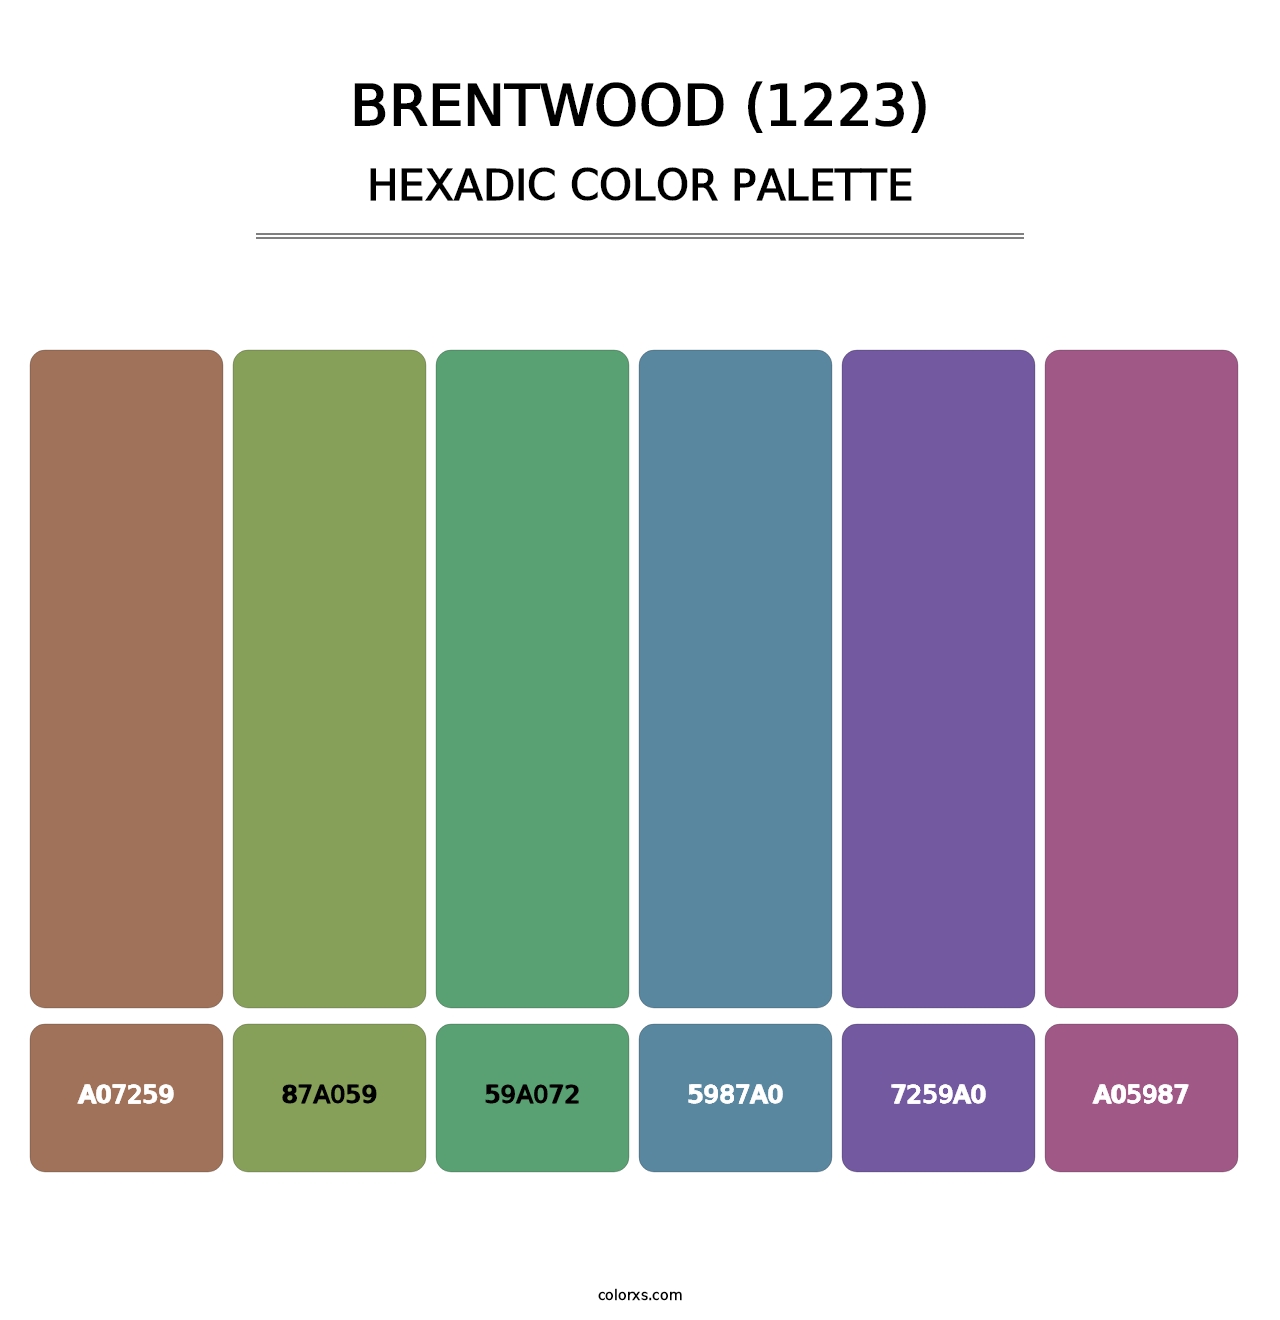 Brentwood (1223) - Hexadic Color Palette